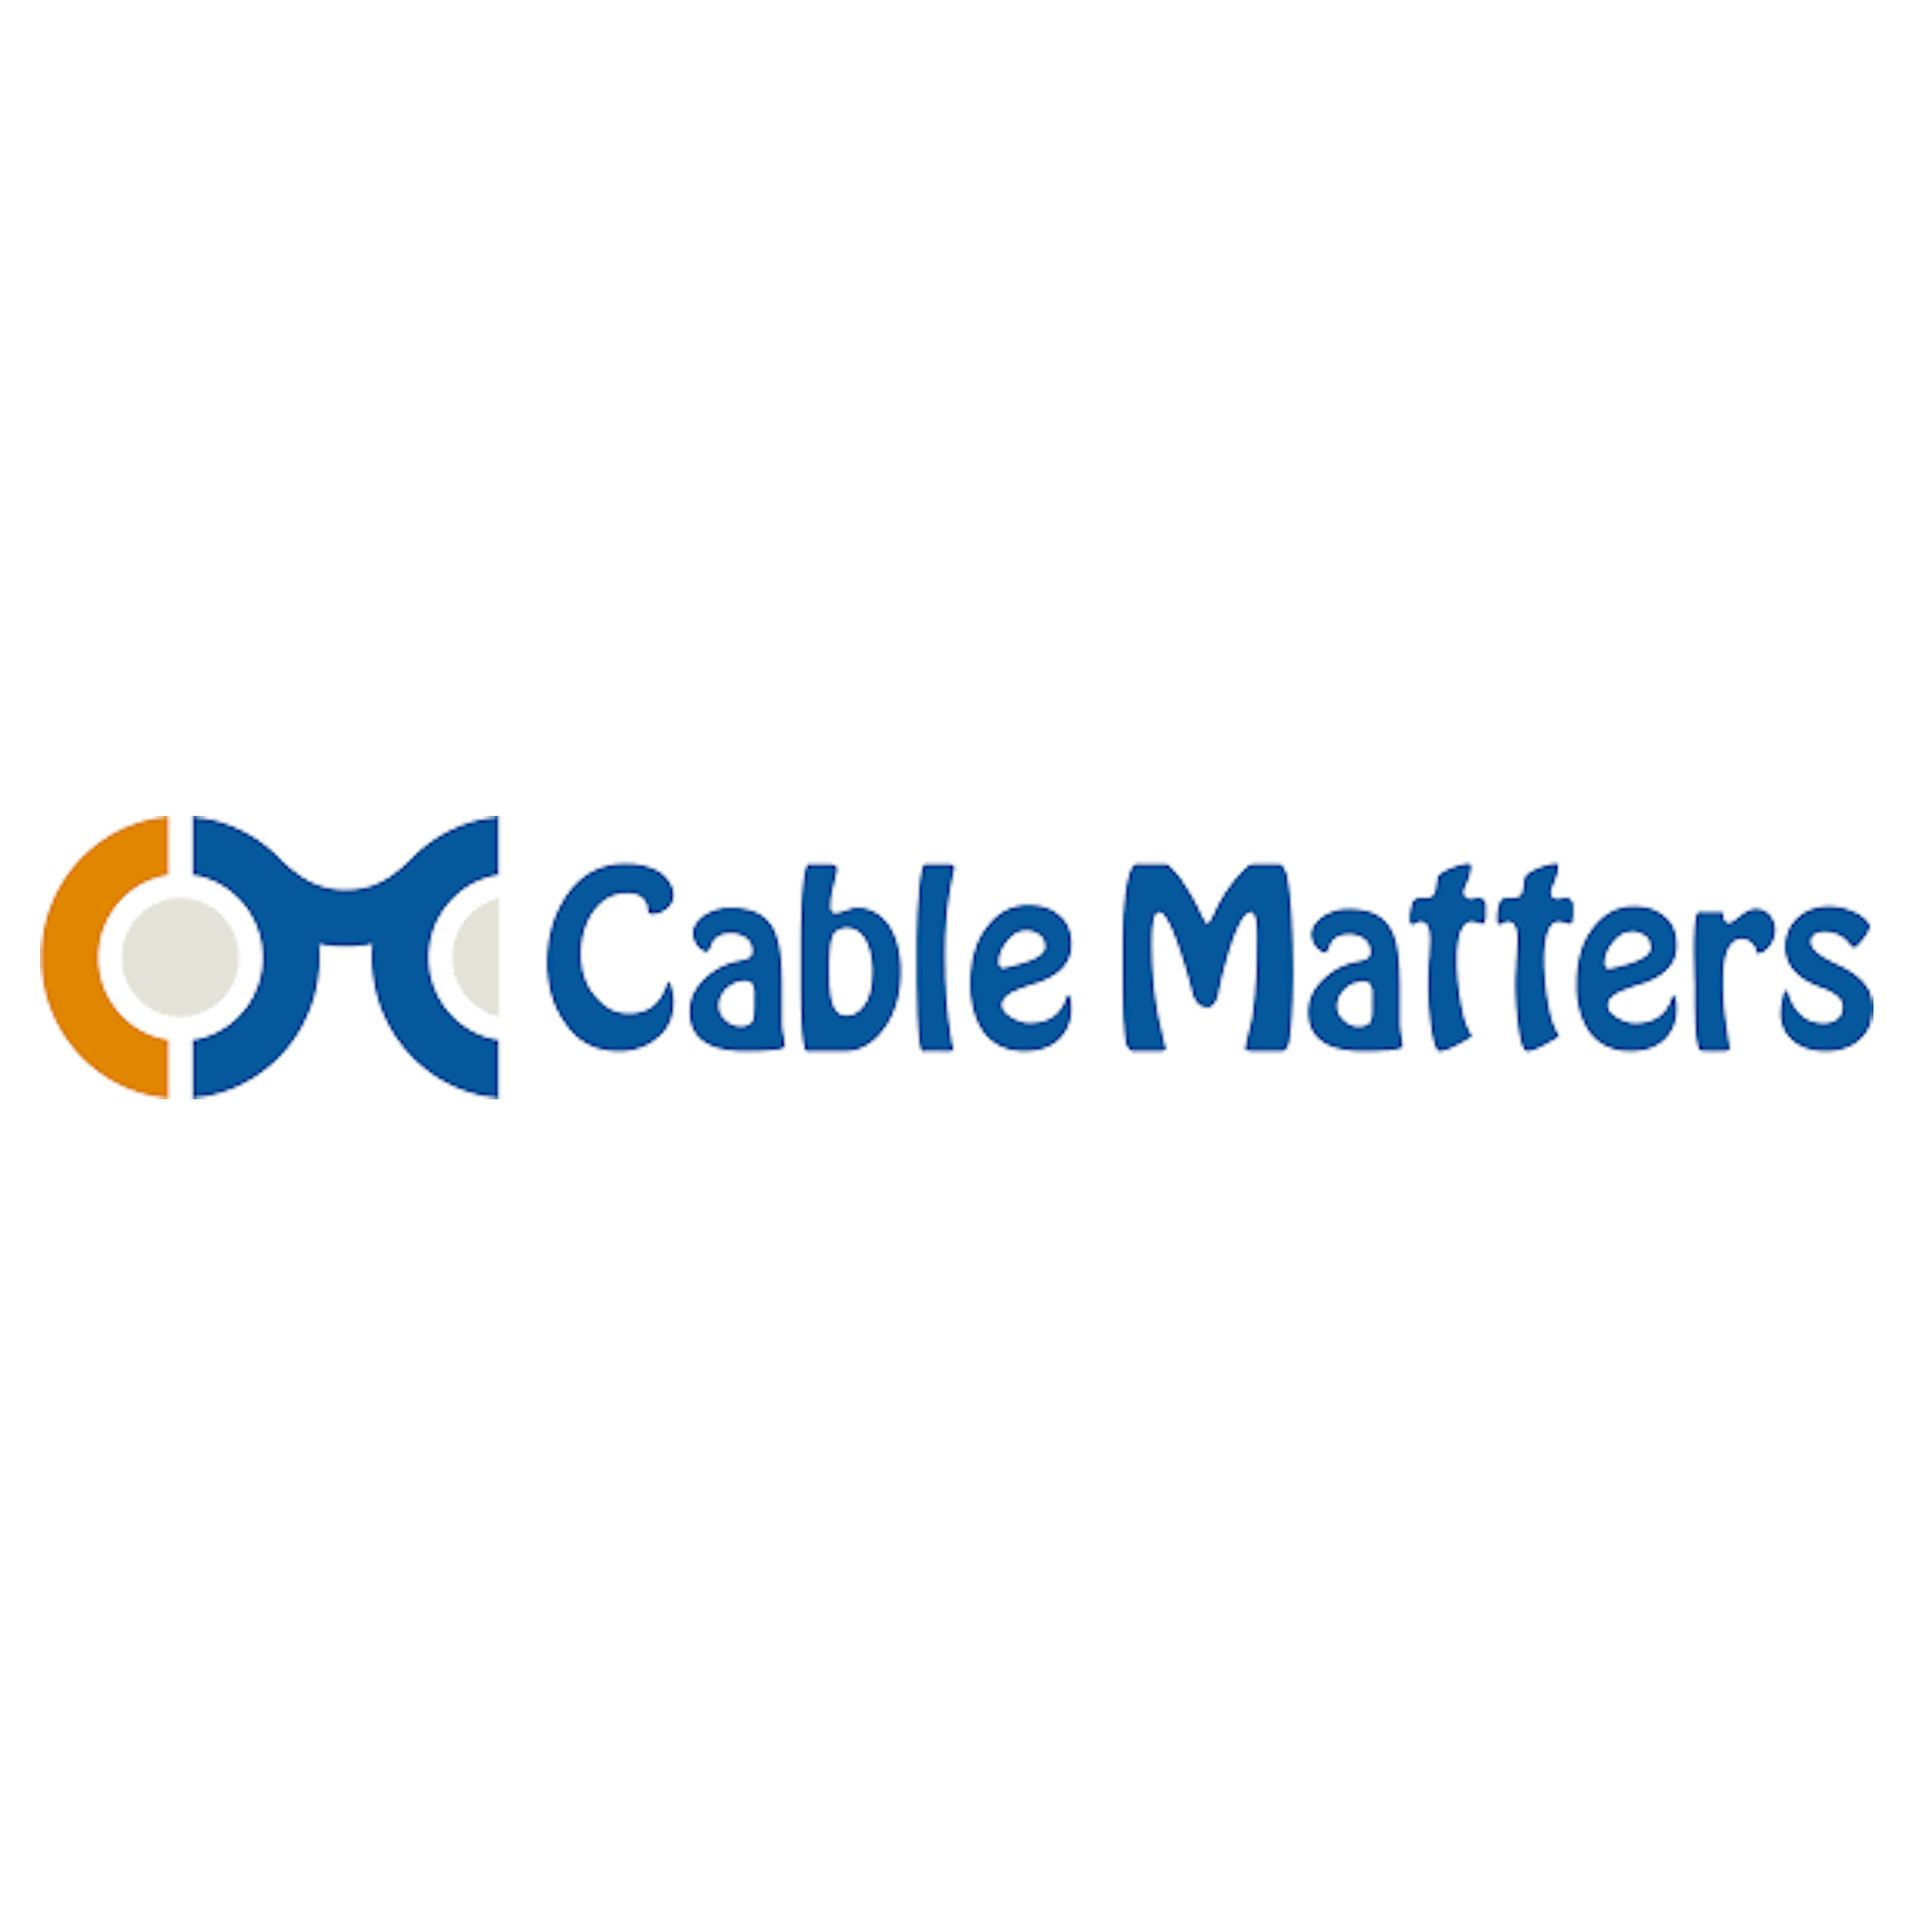 Cable Matters